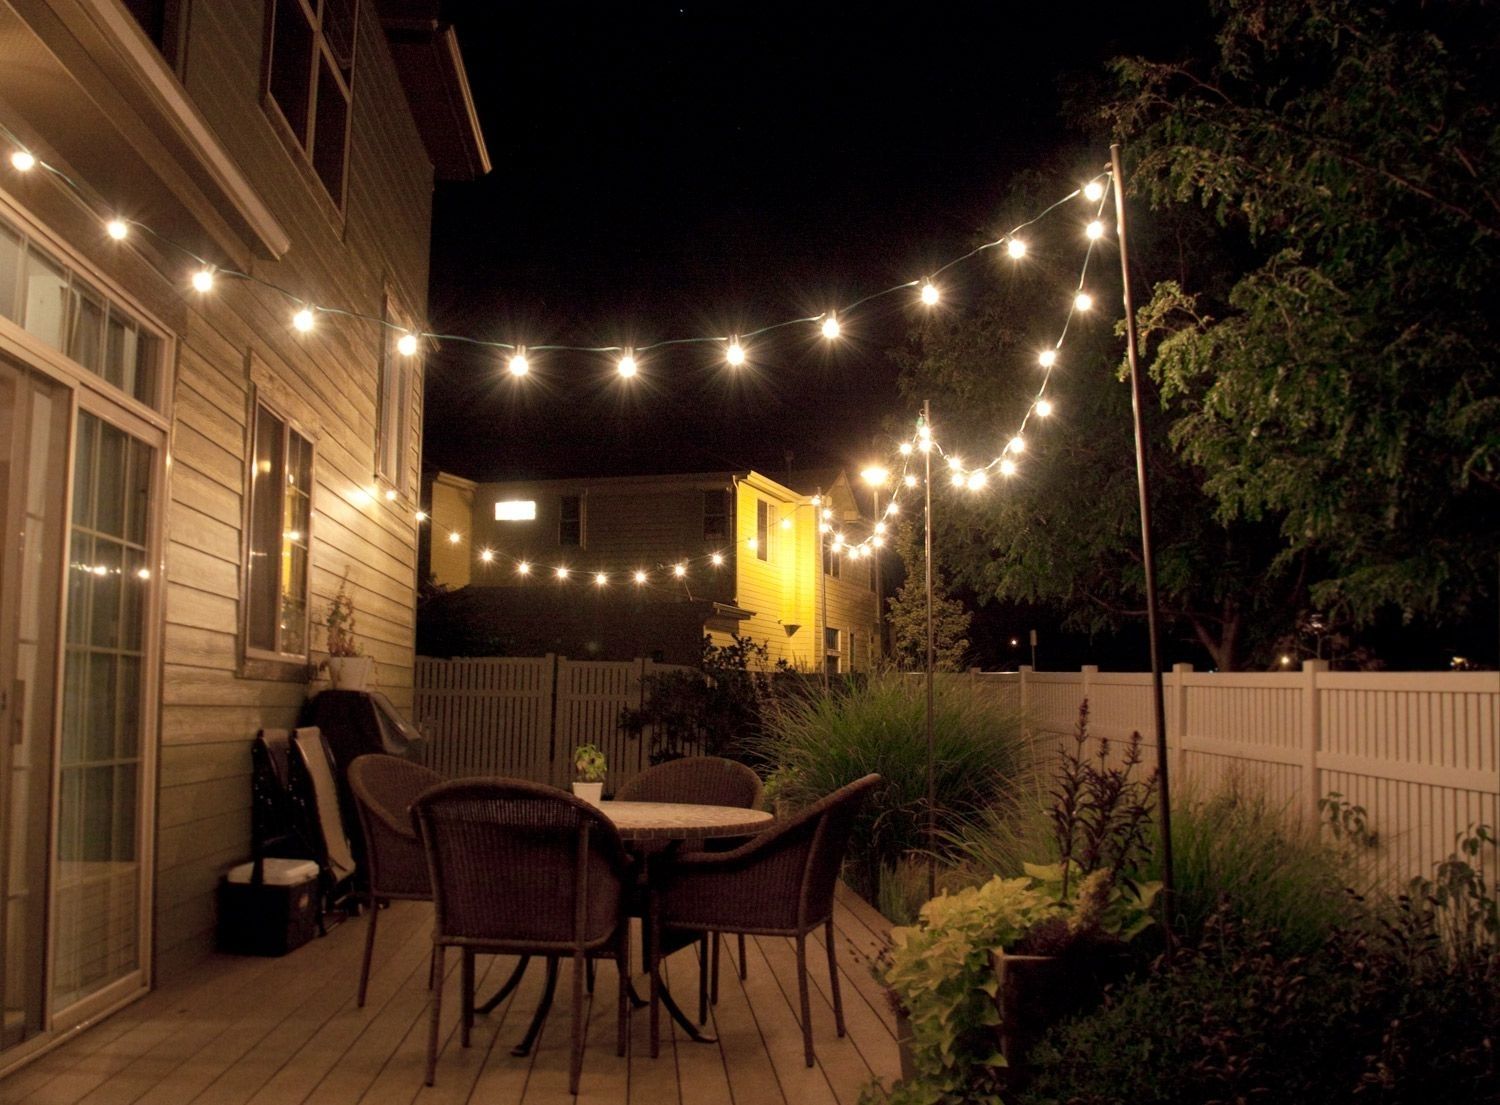 How To Make Inexpensive Poles To Hang String Lights On – Café Style With Regard To Hanging Outdoor Lights On Deck (View 2 of 15)